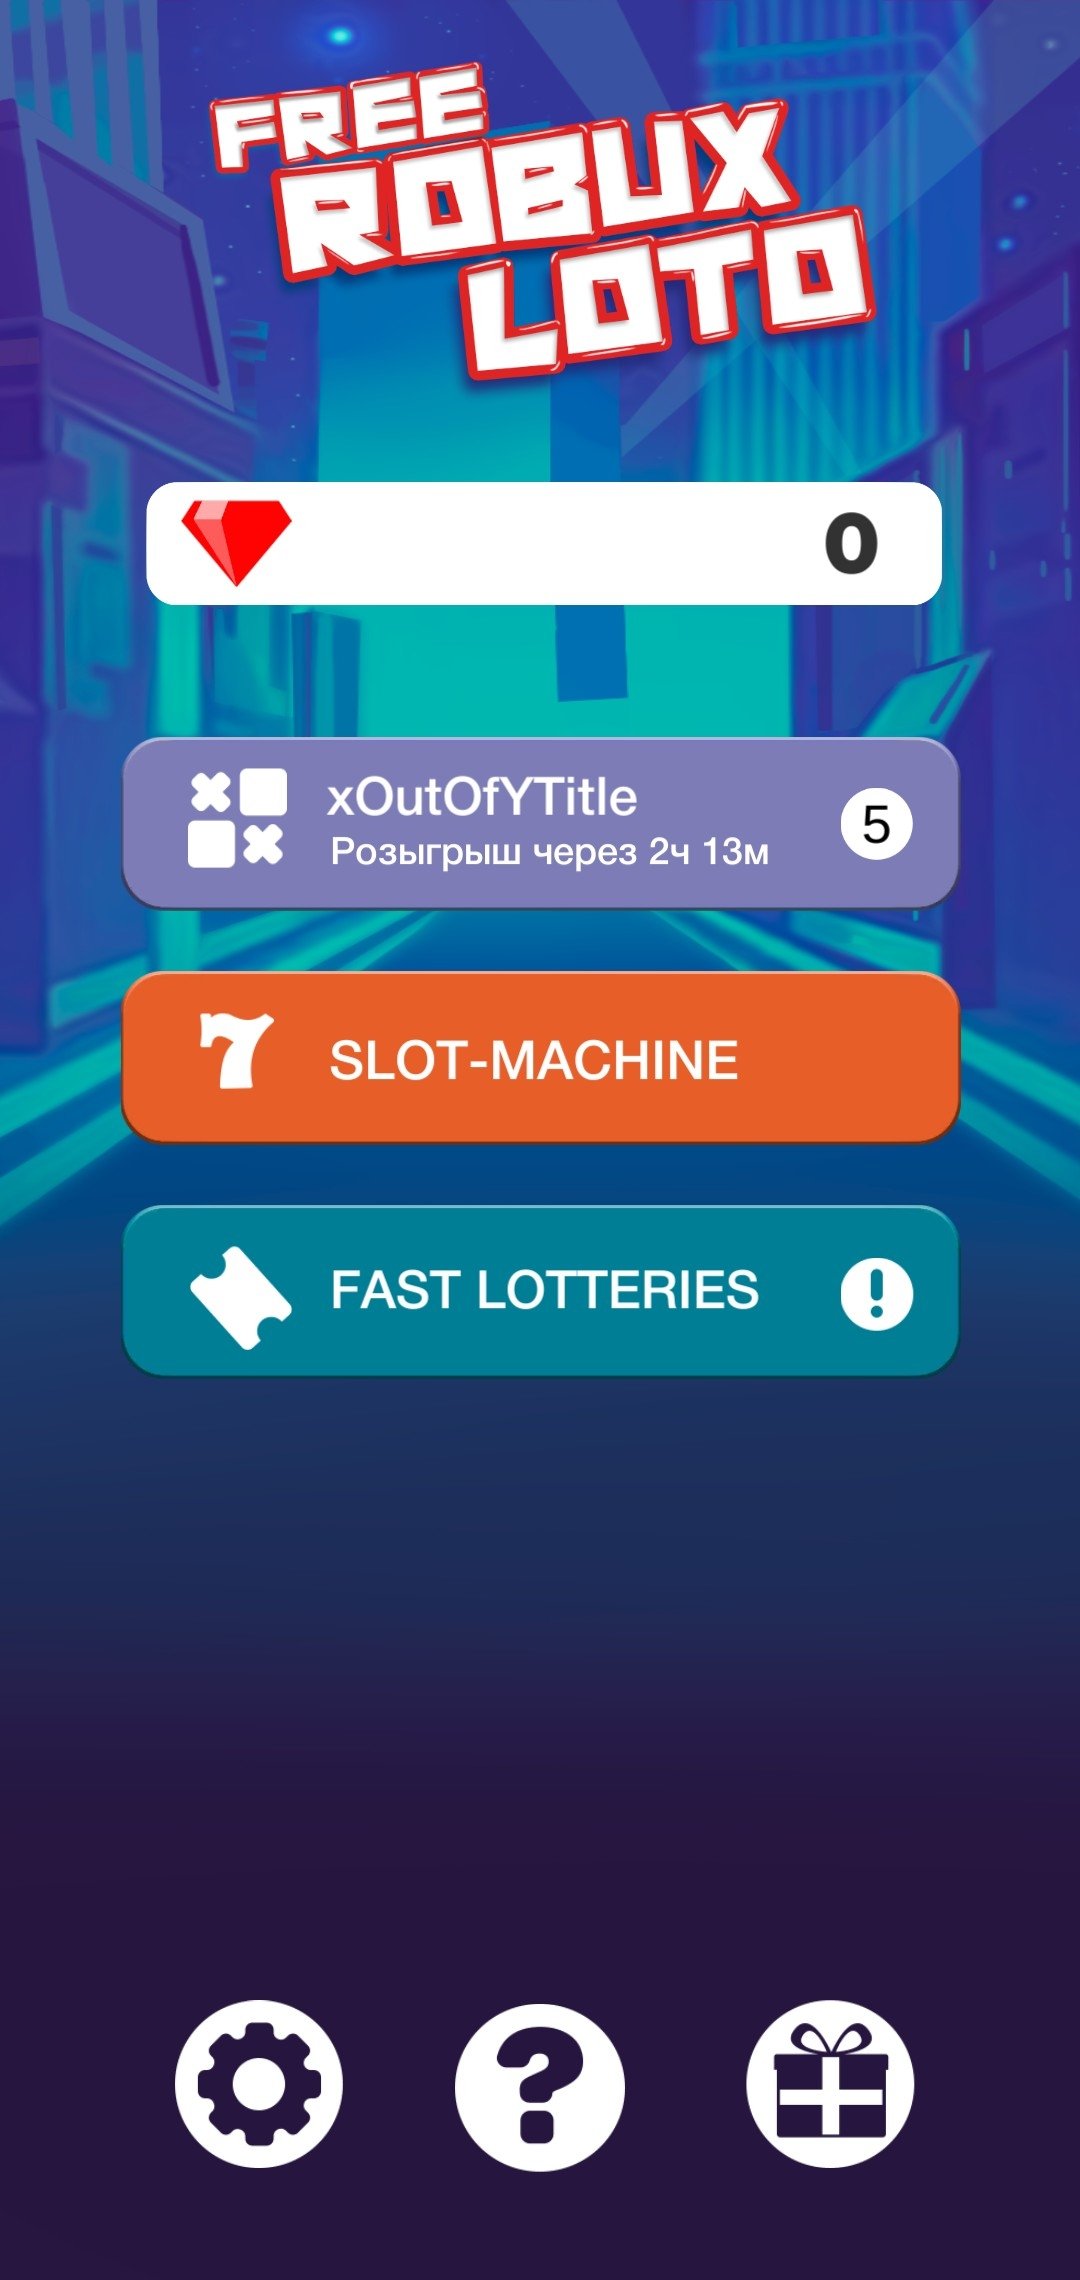 Free Robux Loto APK Download for Android Free